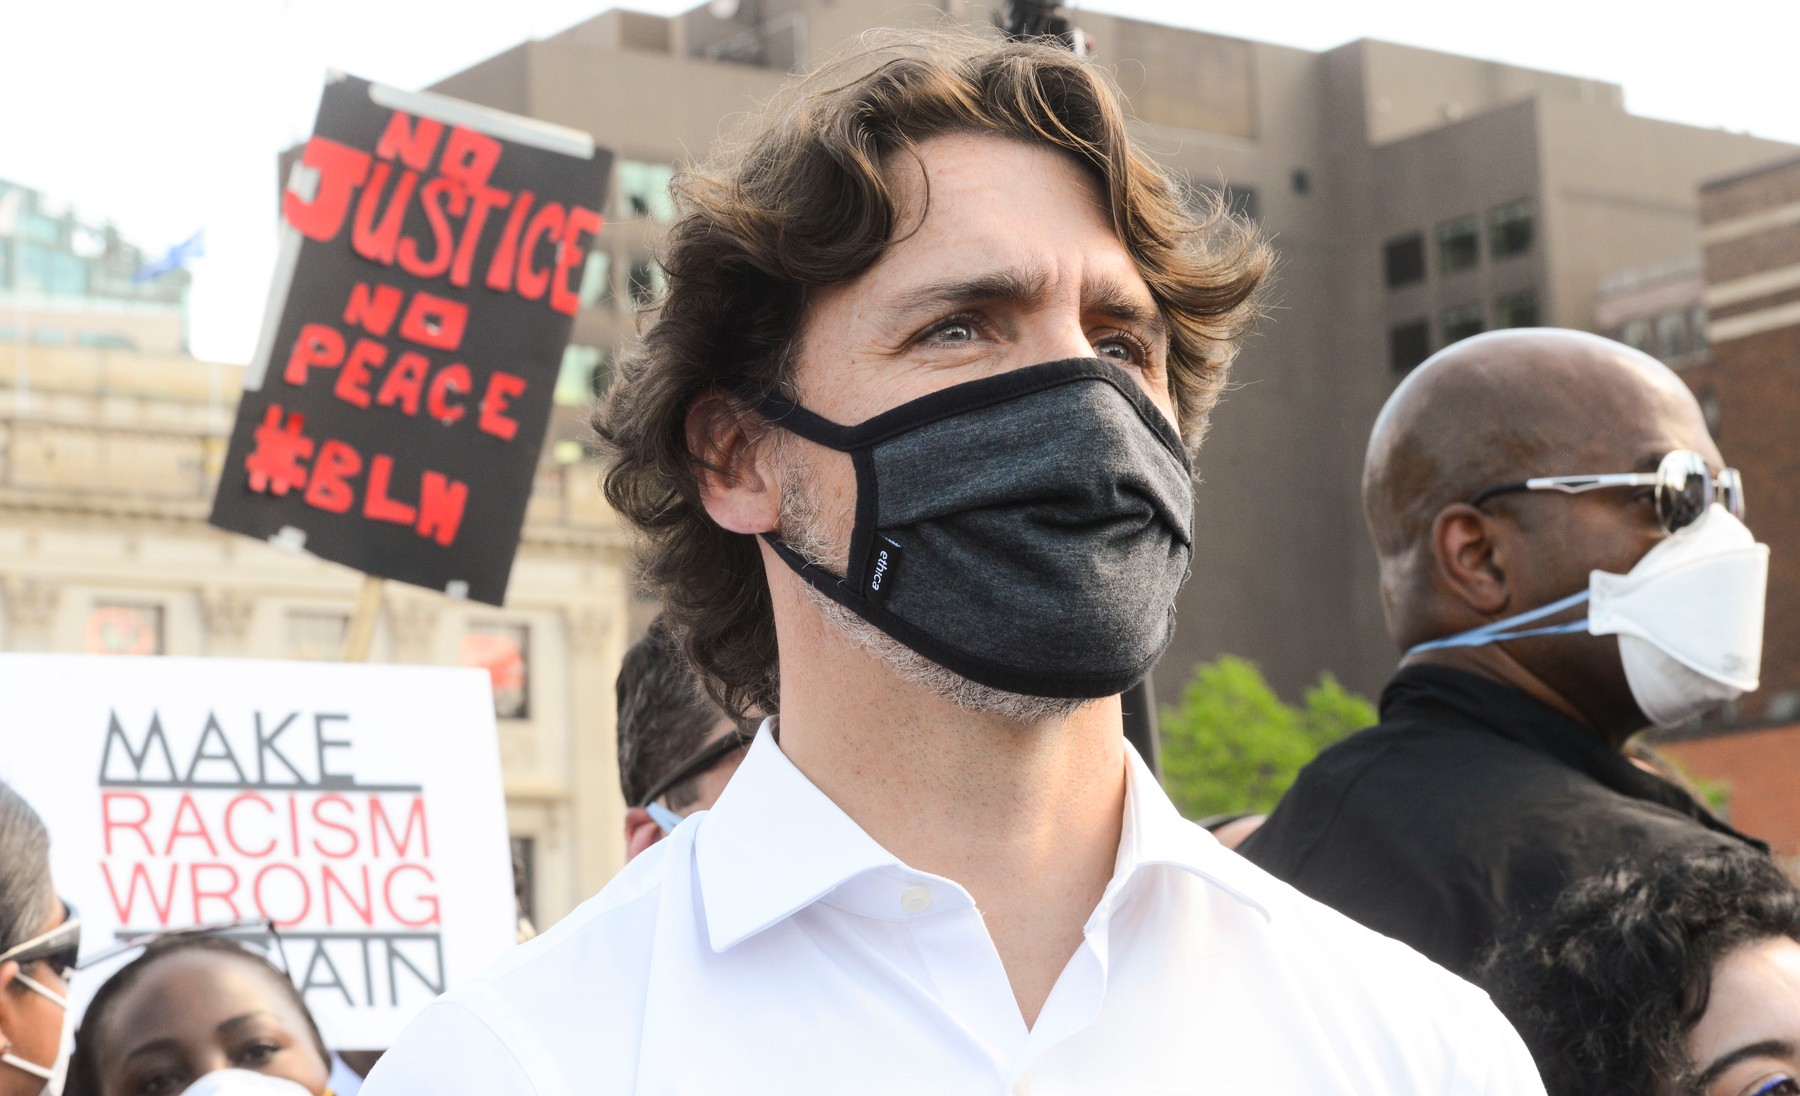 Prime Minister Justin Trudeau takes part in an anti-racism protest on Parliament Hill during the COVID-19 pandemic in Ottawa on Friday, June 5, 2020.,Image: 527478278, License: Rights-managed, Restrictions: World rights excluding North America, Model Release: no, Credit line: Sean Kilpatrick / PA Images / Profimedia